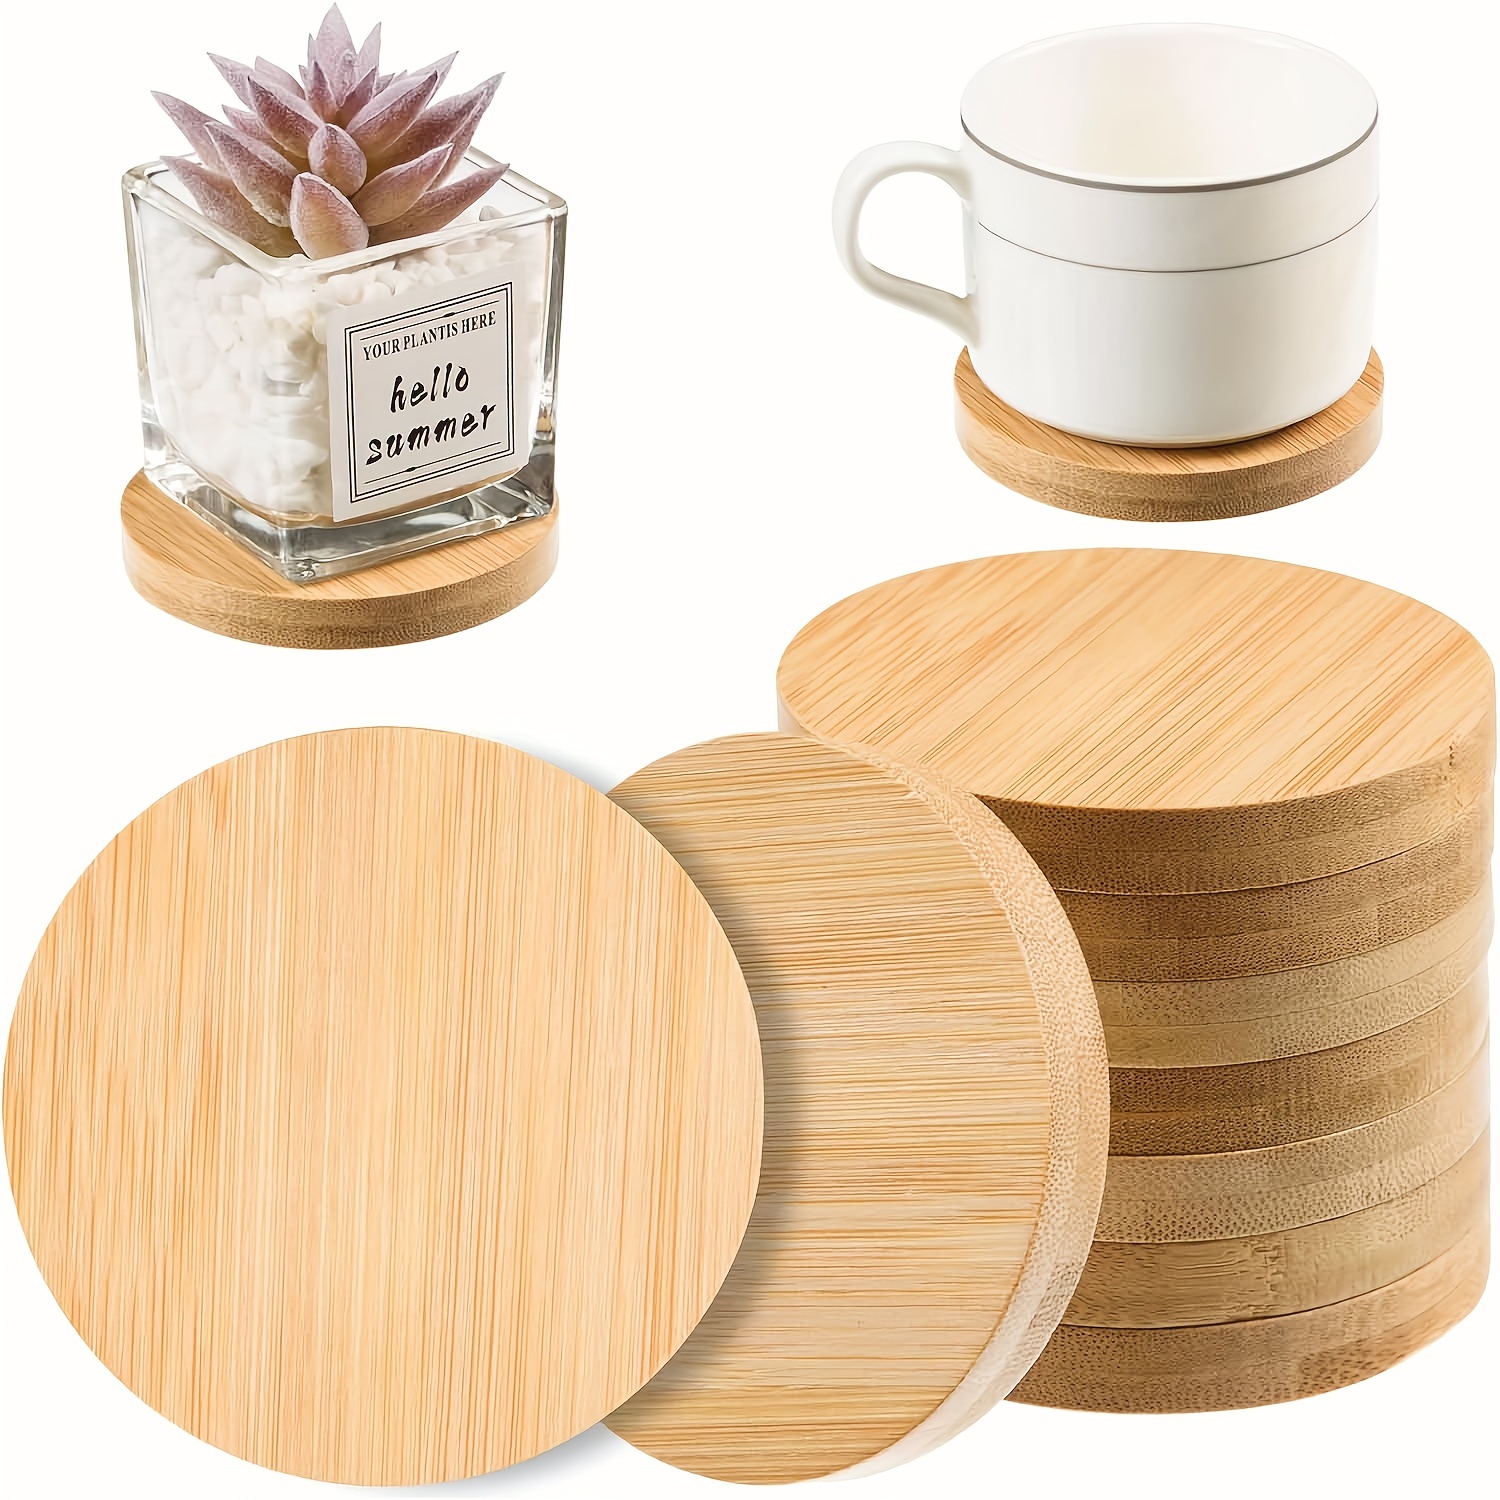 

6pcs Round Bamboo Coasters 3.94 Inches Bamboo Wood Coasters Wooden Coasters Bamboo Drink Cup Coasters Set For Coffee Table, Hot Drinks, Cold Drinks, Bar, Home, Kitchen, Housewarming Gifts